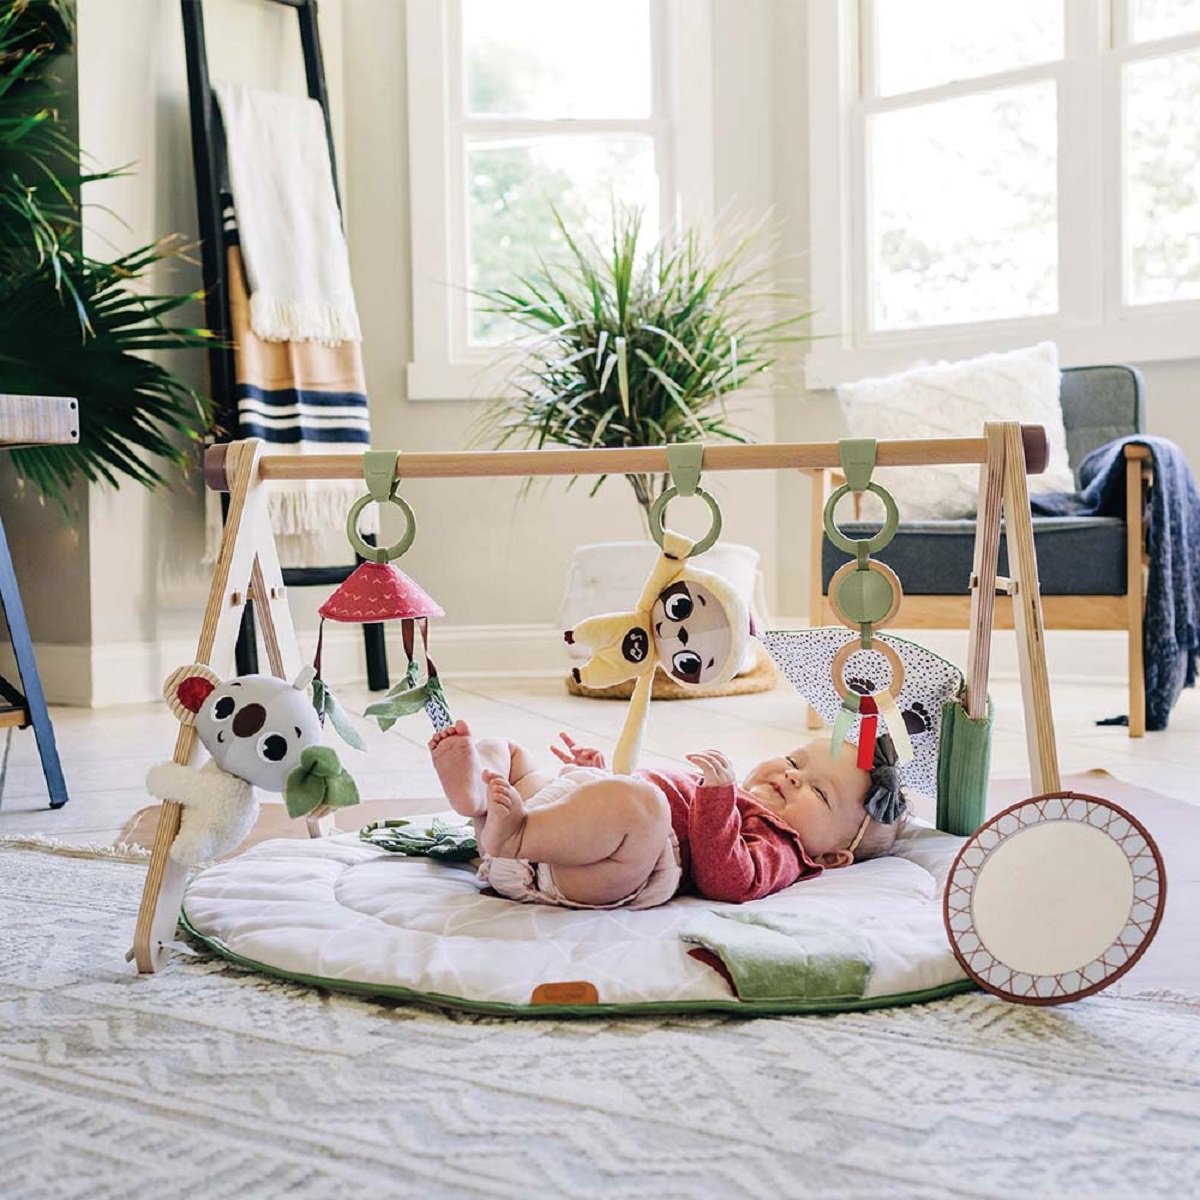 Top Baby Products You Need When Welcoming A New Baby